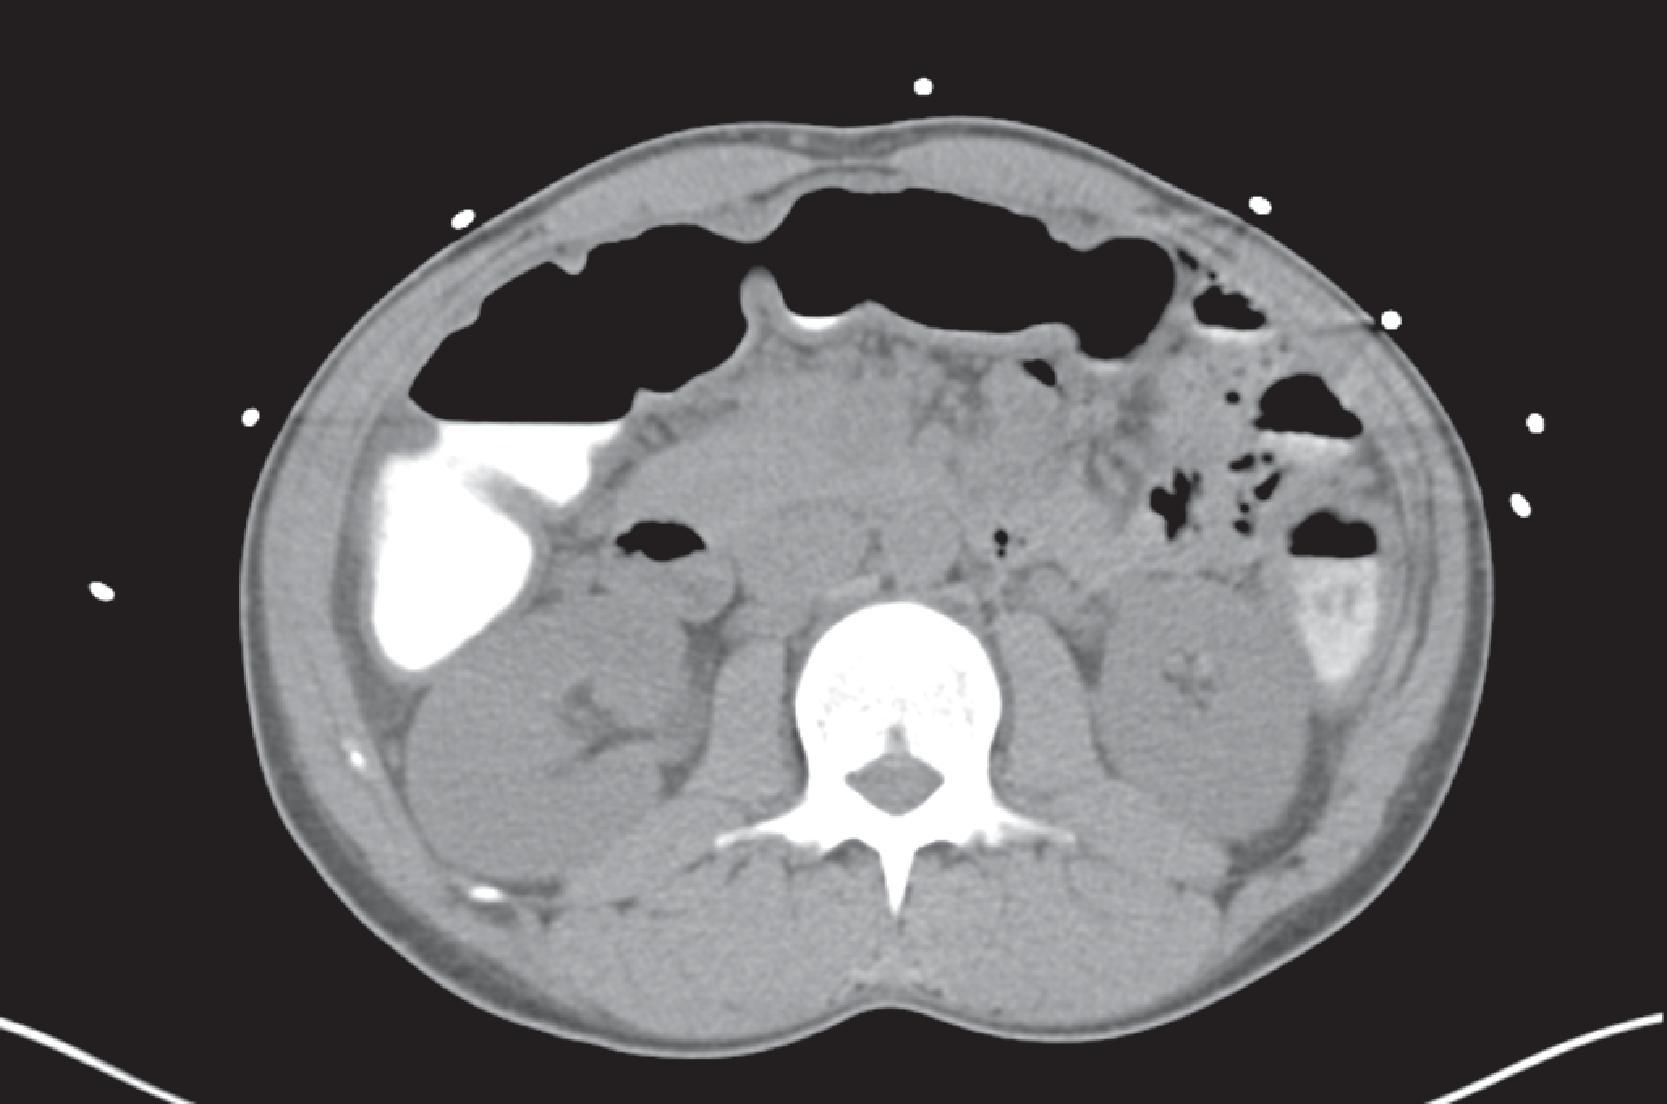 FIG. 1, Computed tomography scan of the abdomen showing dilated and thickened wall of the colon.